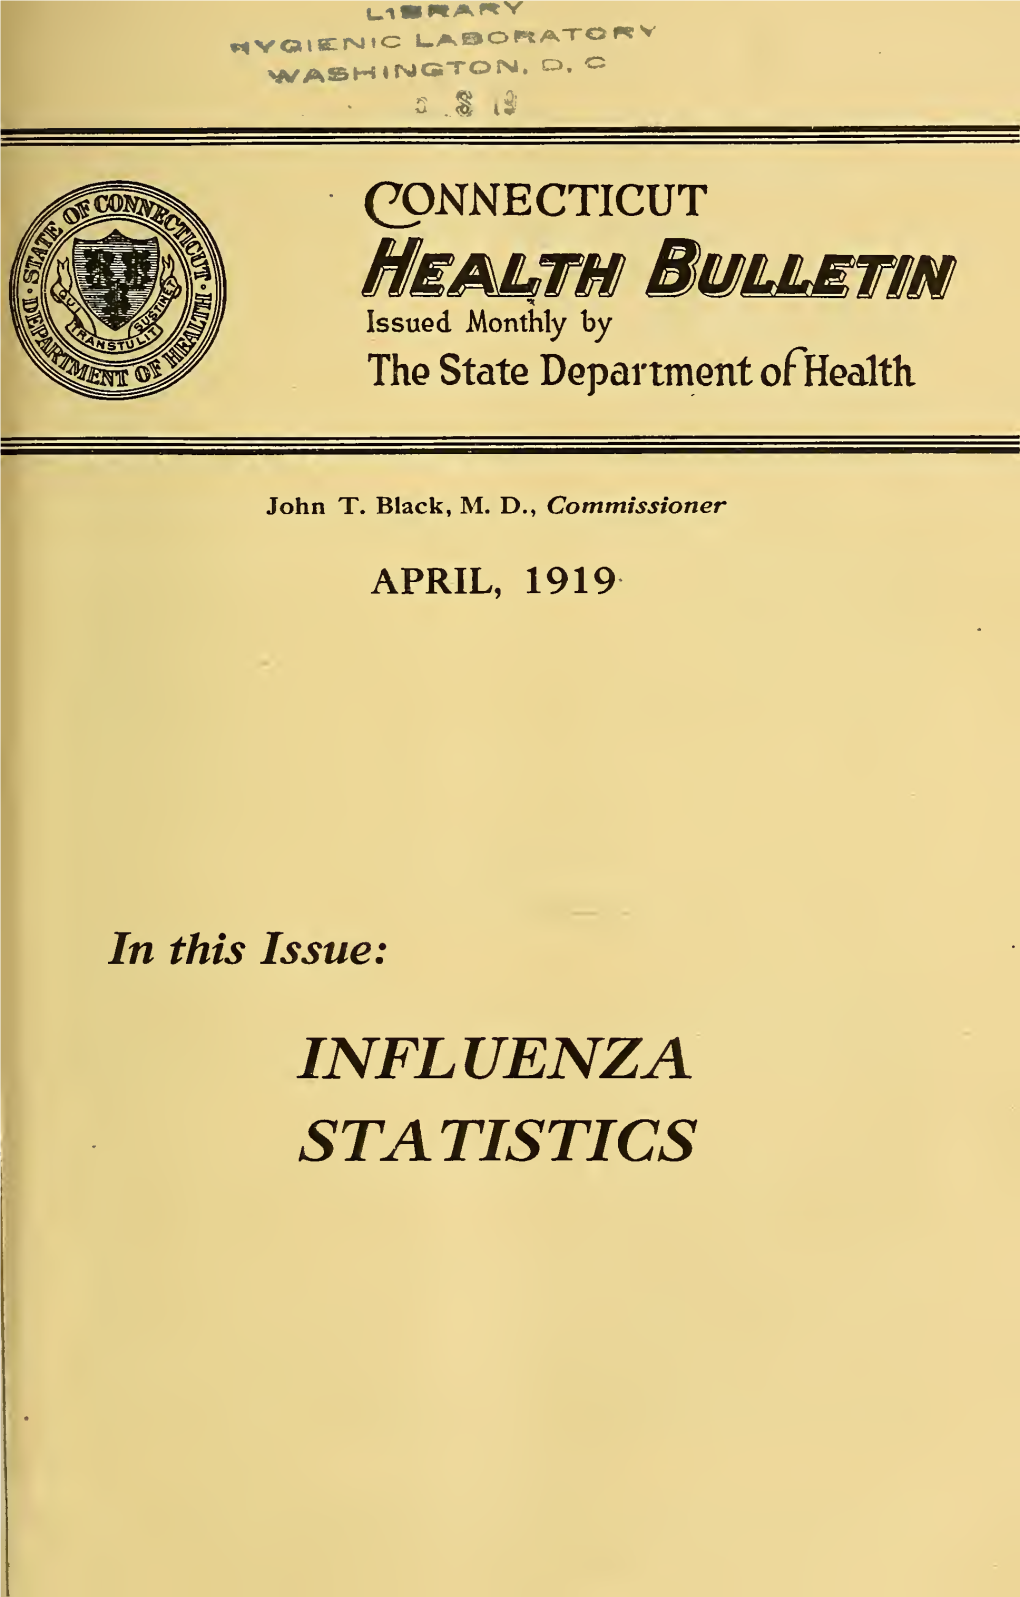 The Epidemic of Influenza in Connecticut